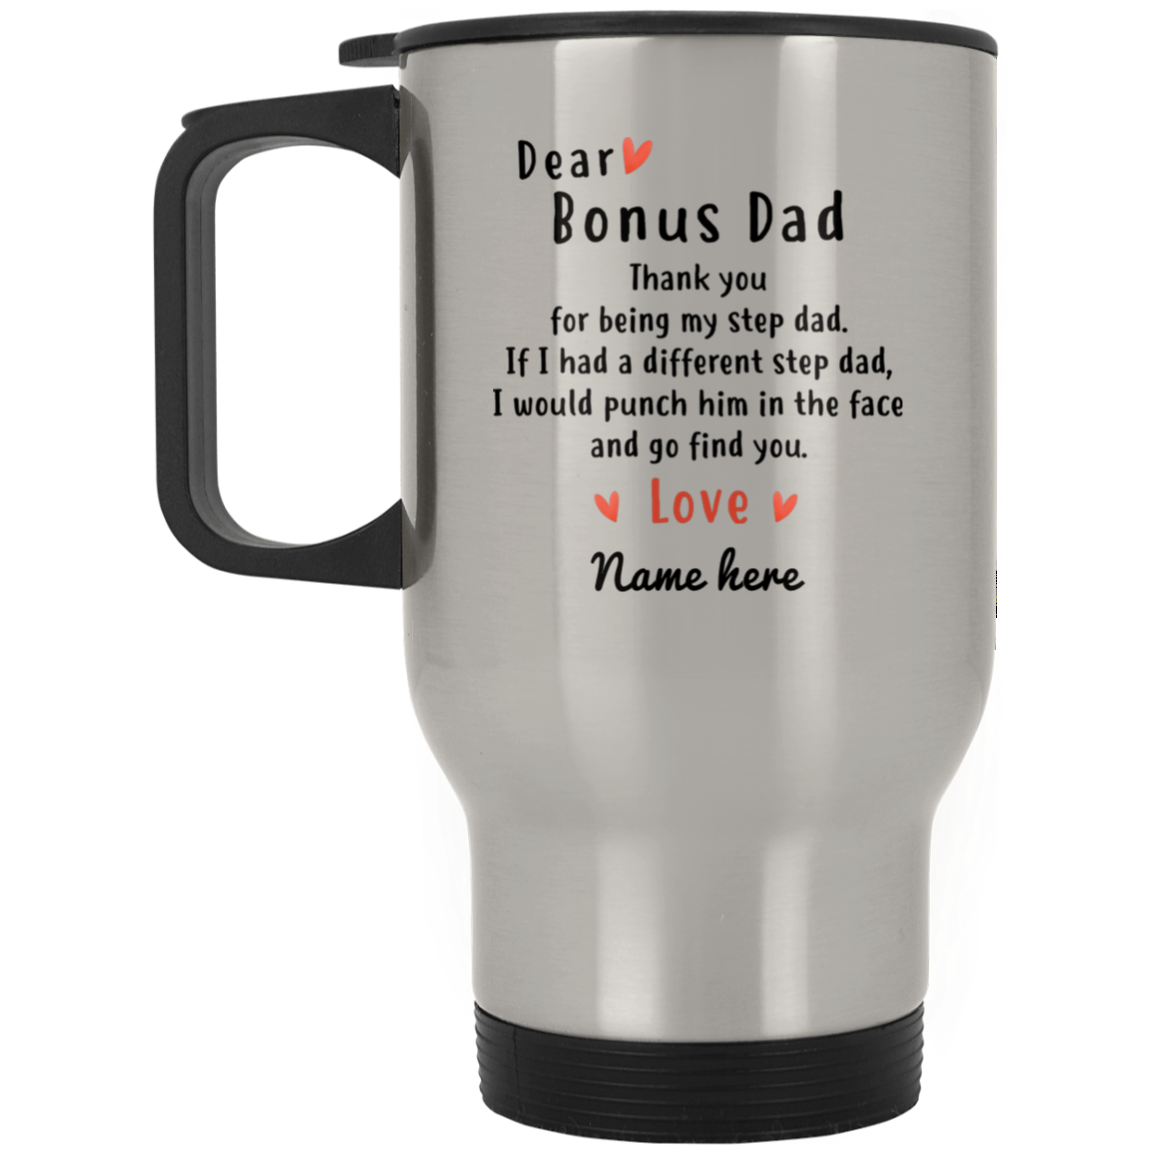 Mom Thanks for Wiping my Butt, Personalized Coffee Mugs, Funny Mother' -  PersonalFury